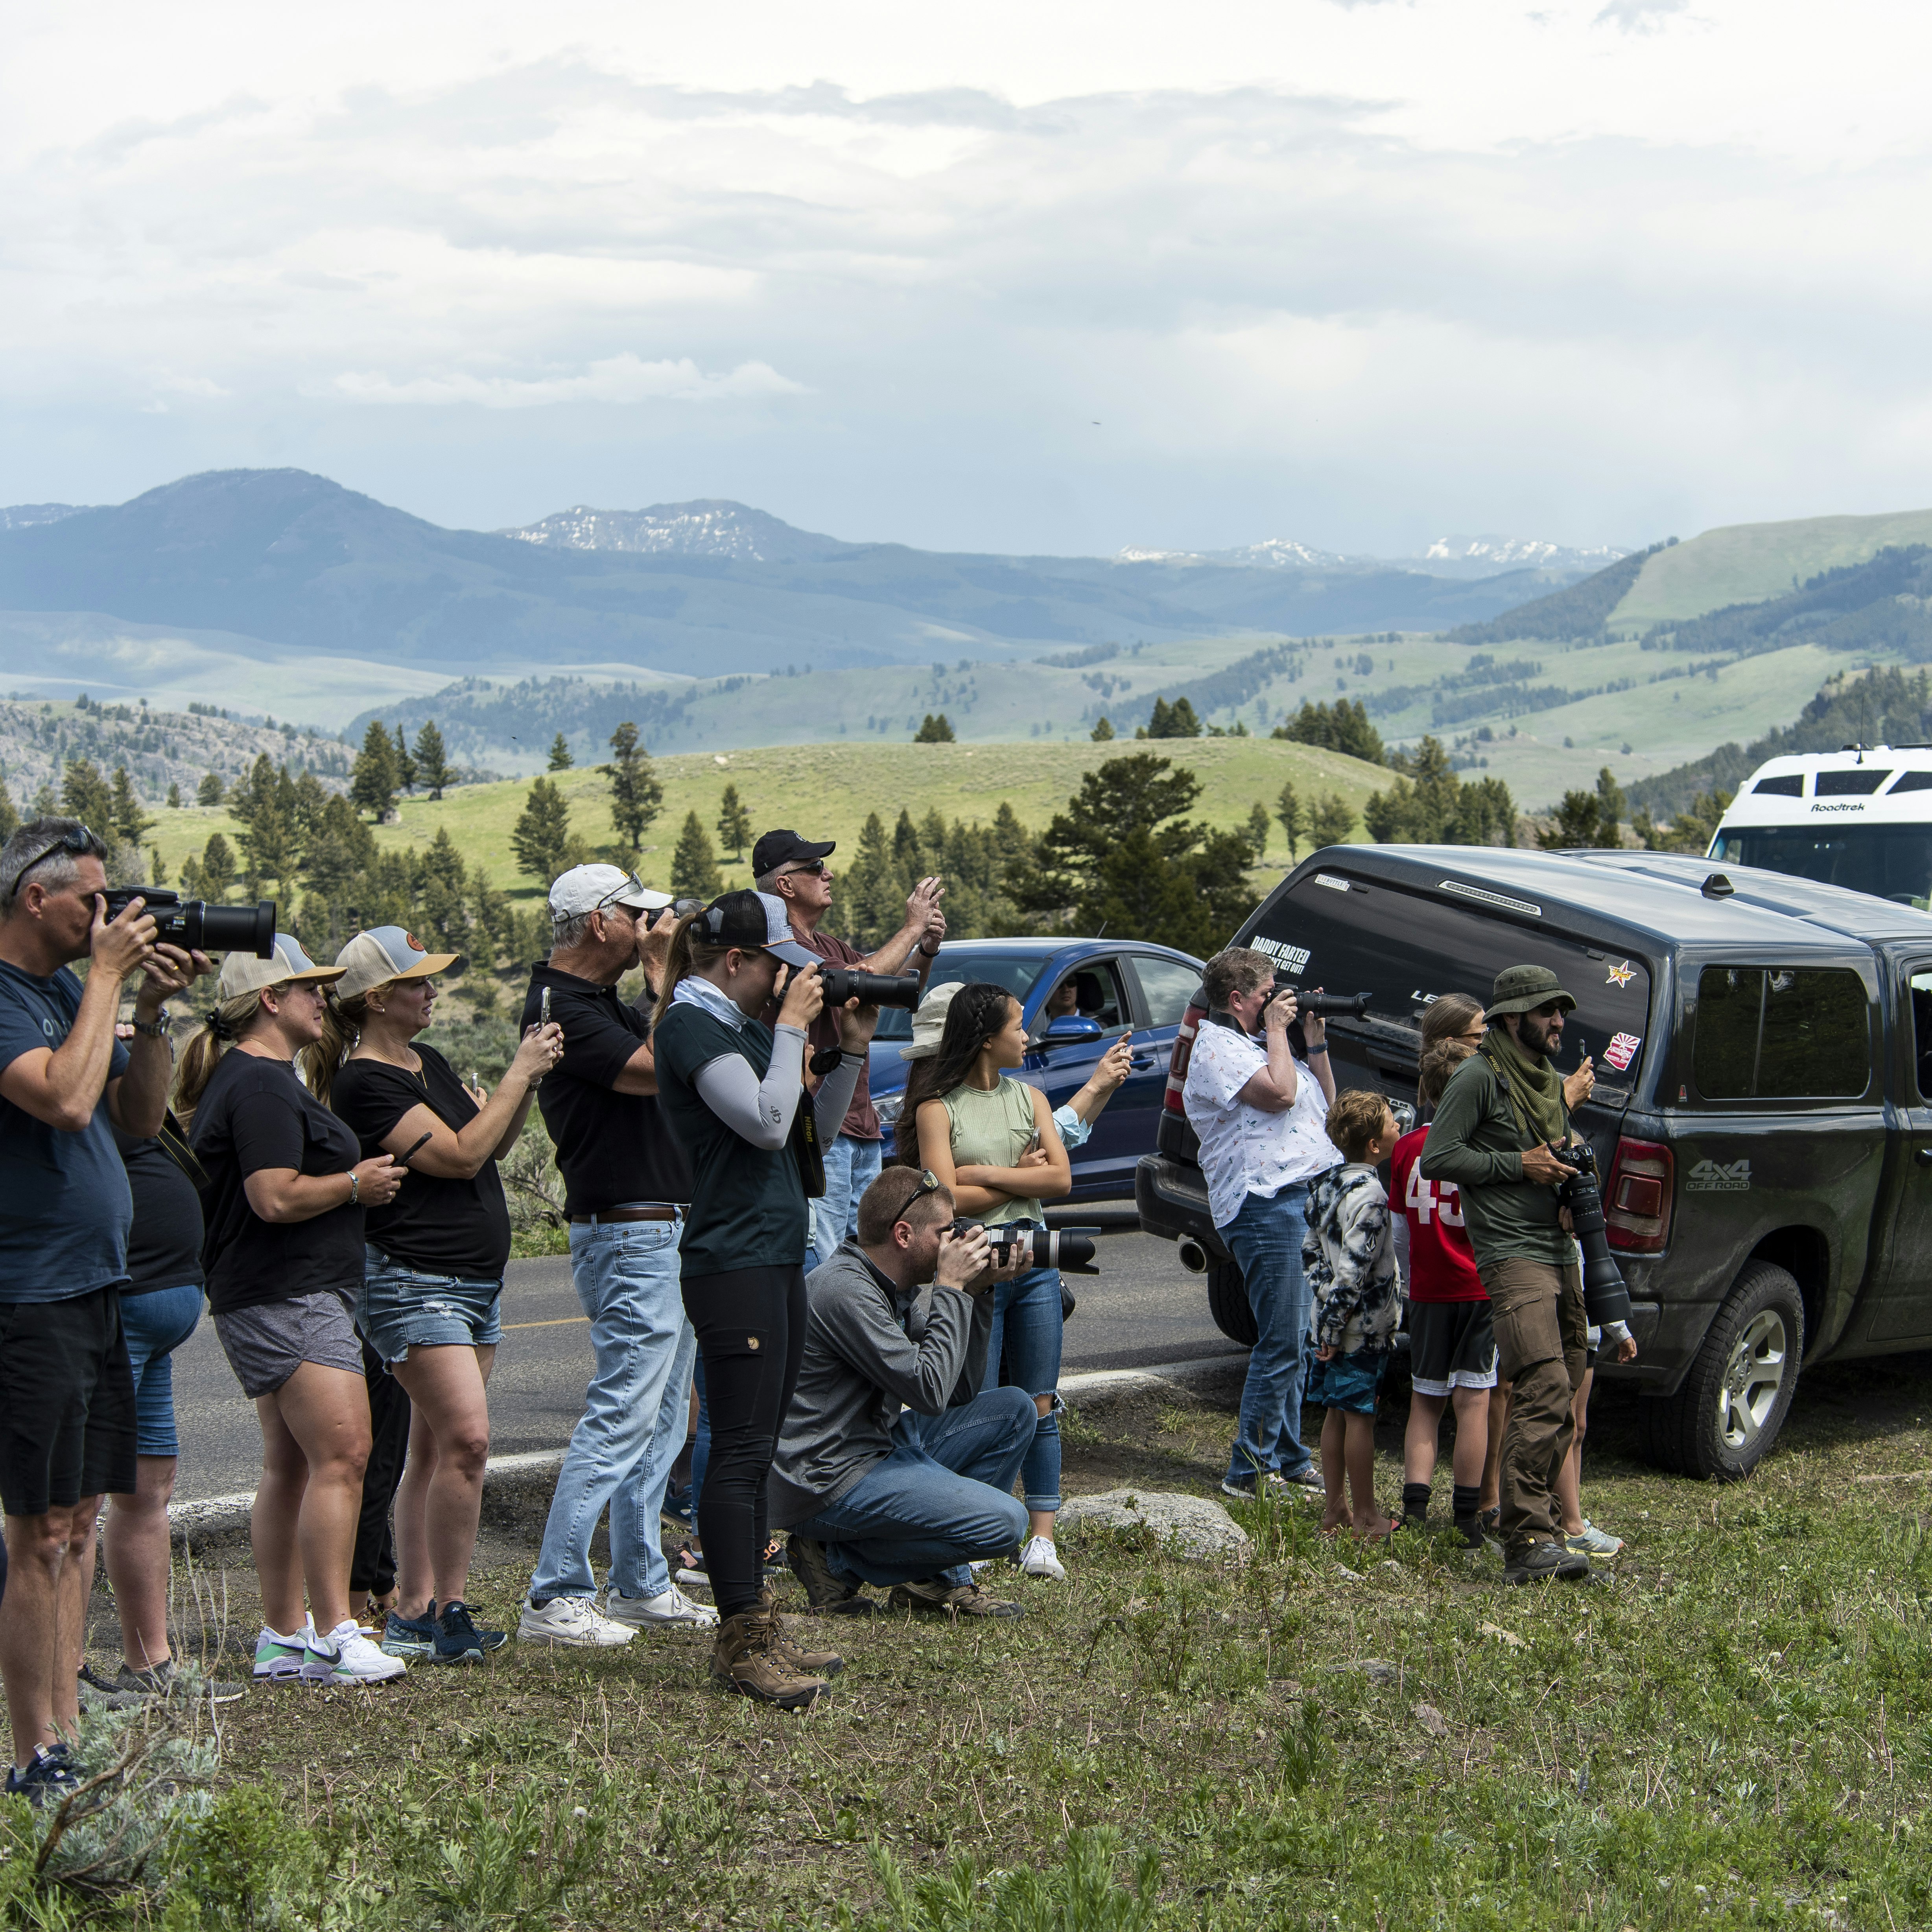 YELLOWSTONE NATIONAL PARK,WY - JUNE 08: Visitors watch black bears in Yellowstone National Park on June 8,2021. Yellowstone is seeing a record number of visitors since all entrances were open for the 2021 tourist season.  (Photo by William Campbell/Getty Images)